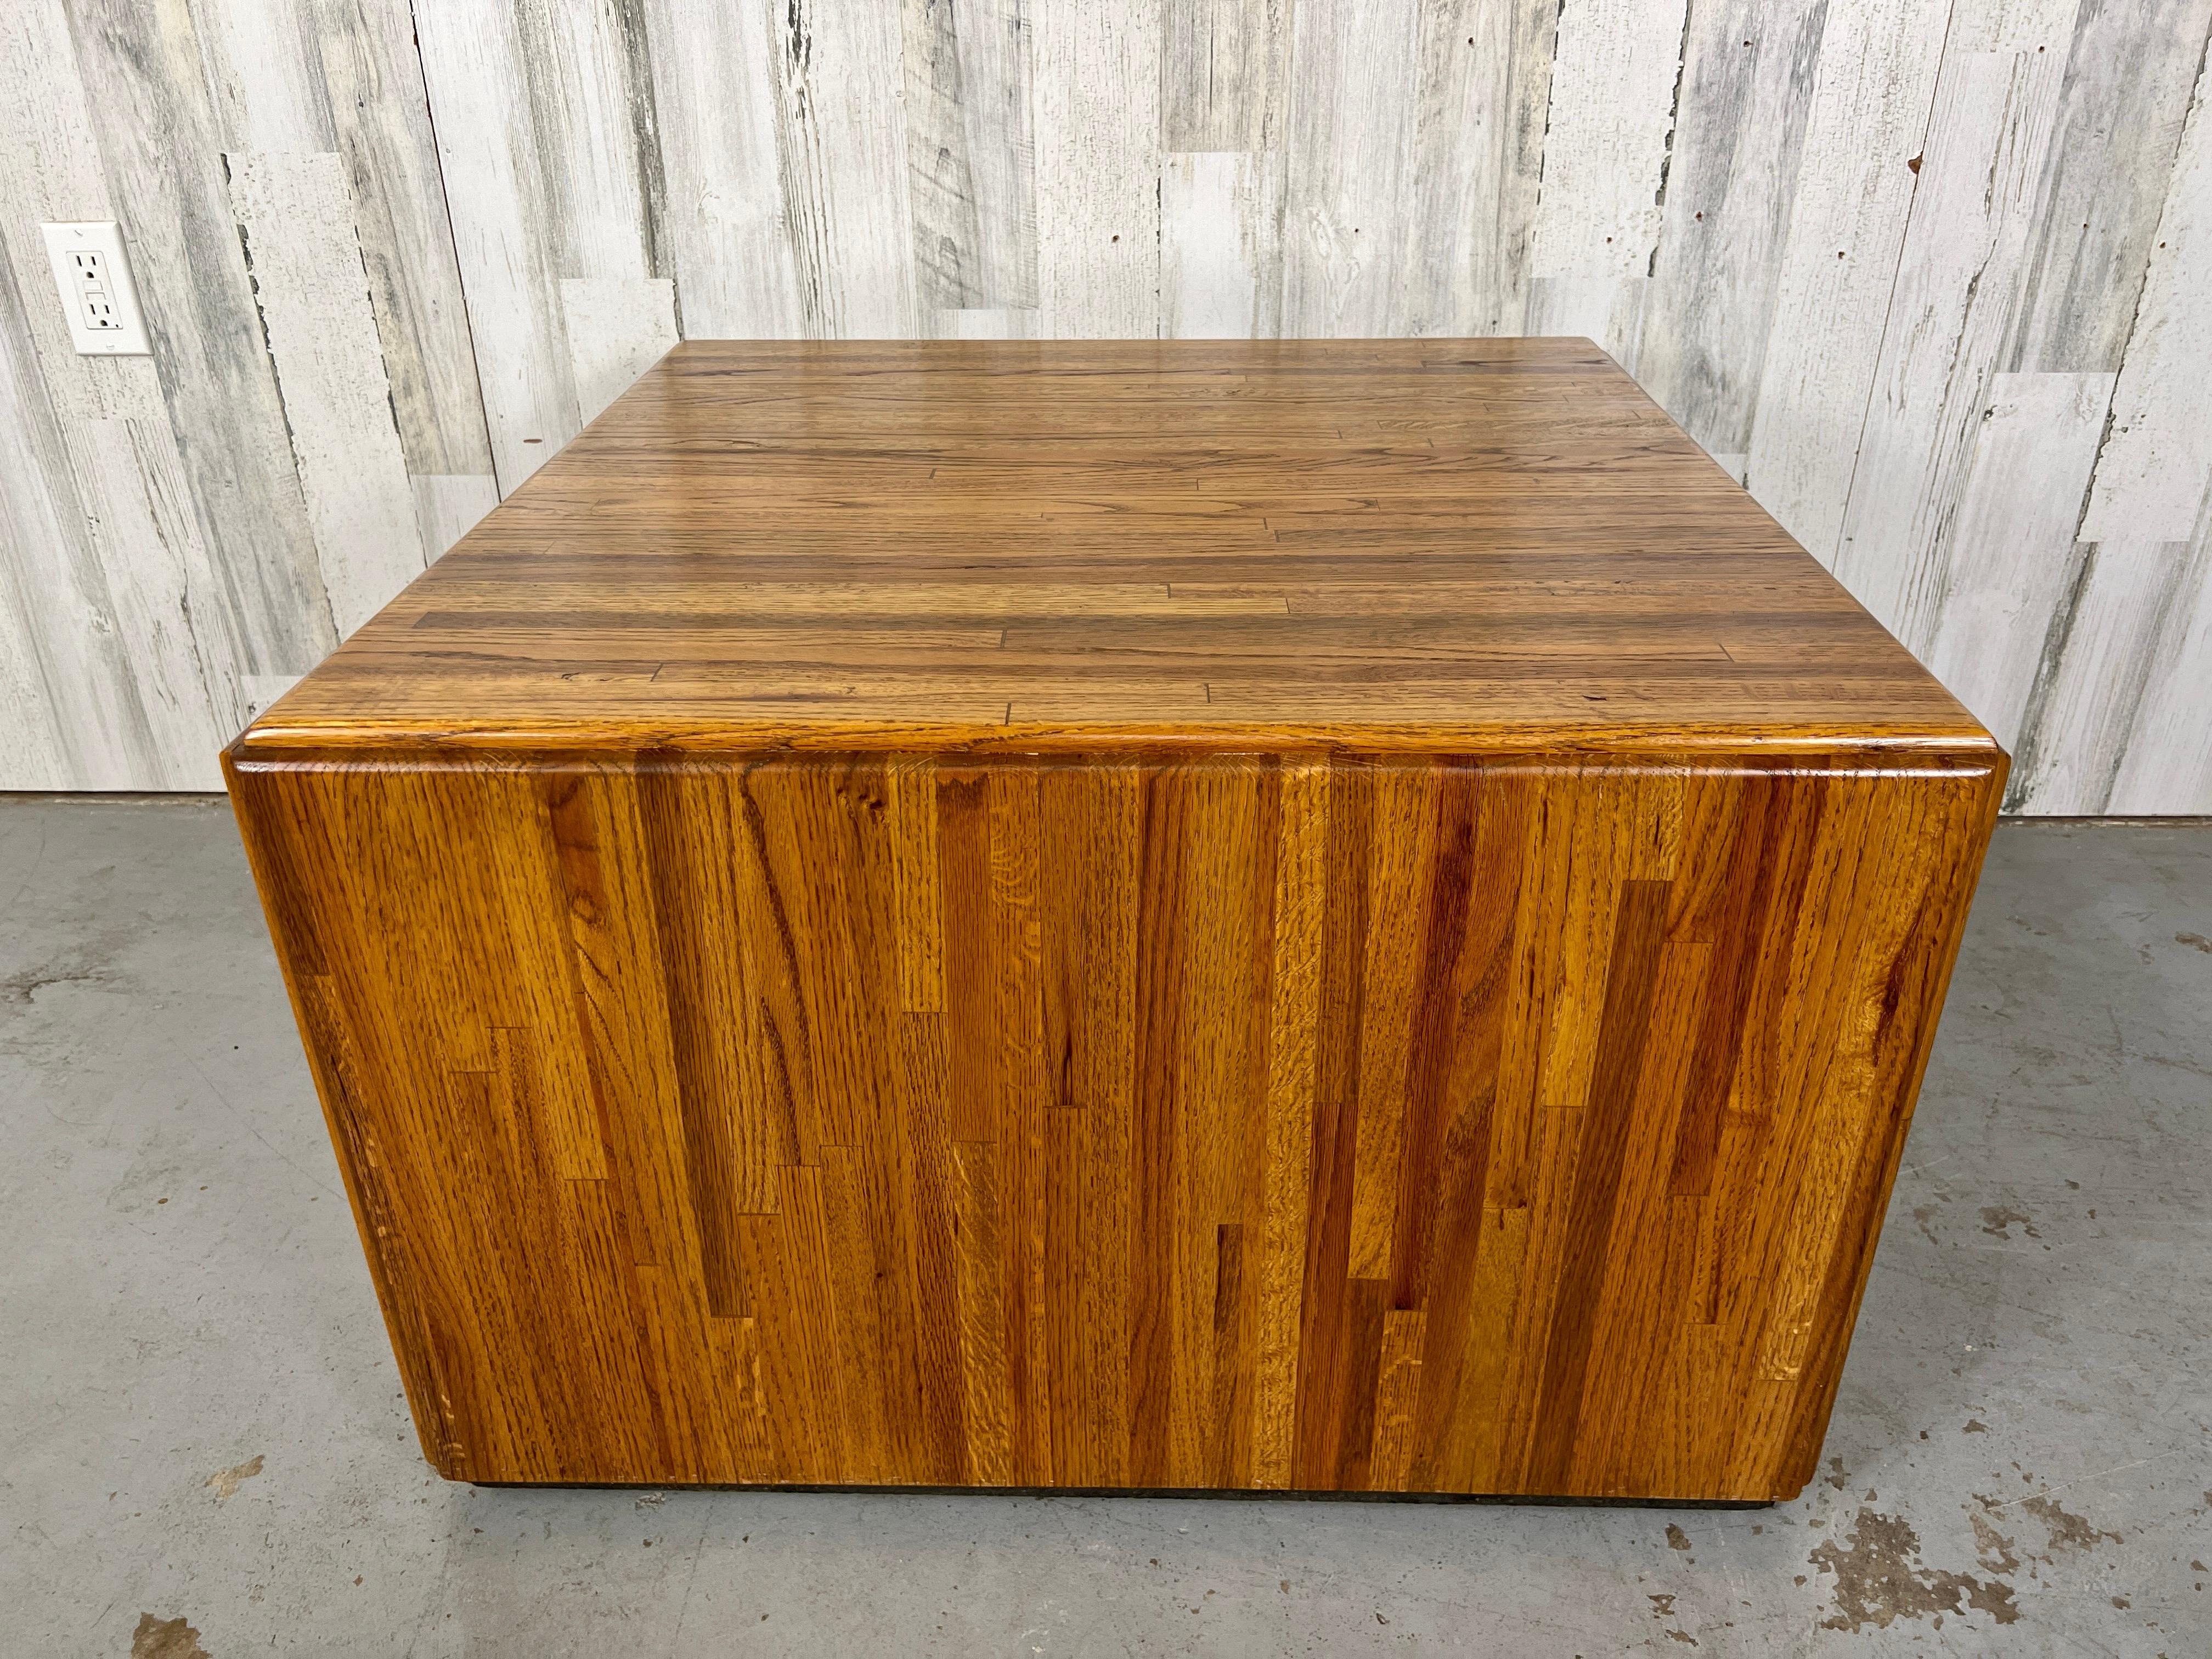 Solid oak parquet cube coffee table / end table by Lou Hodges for California design group.